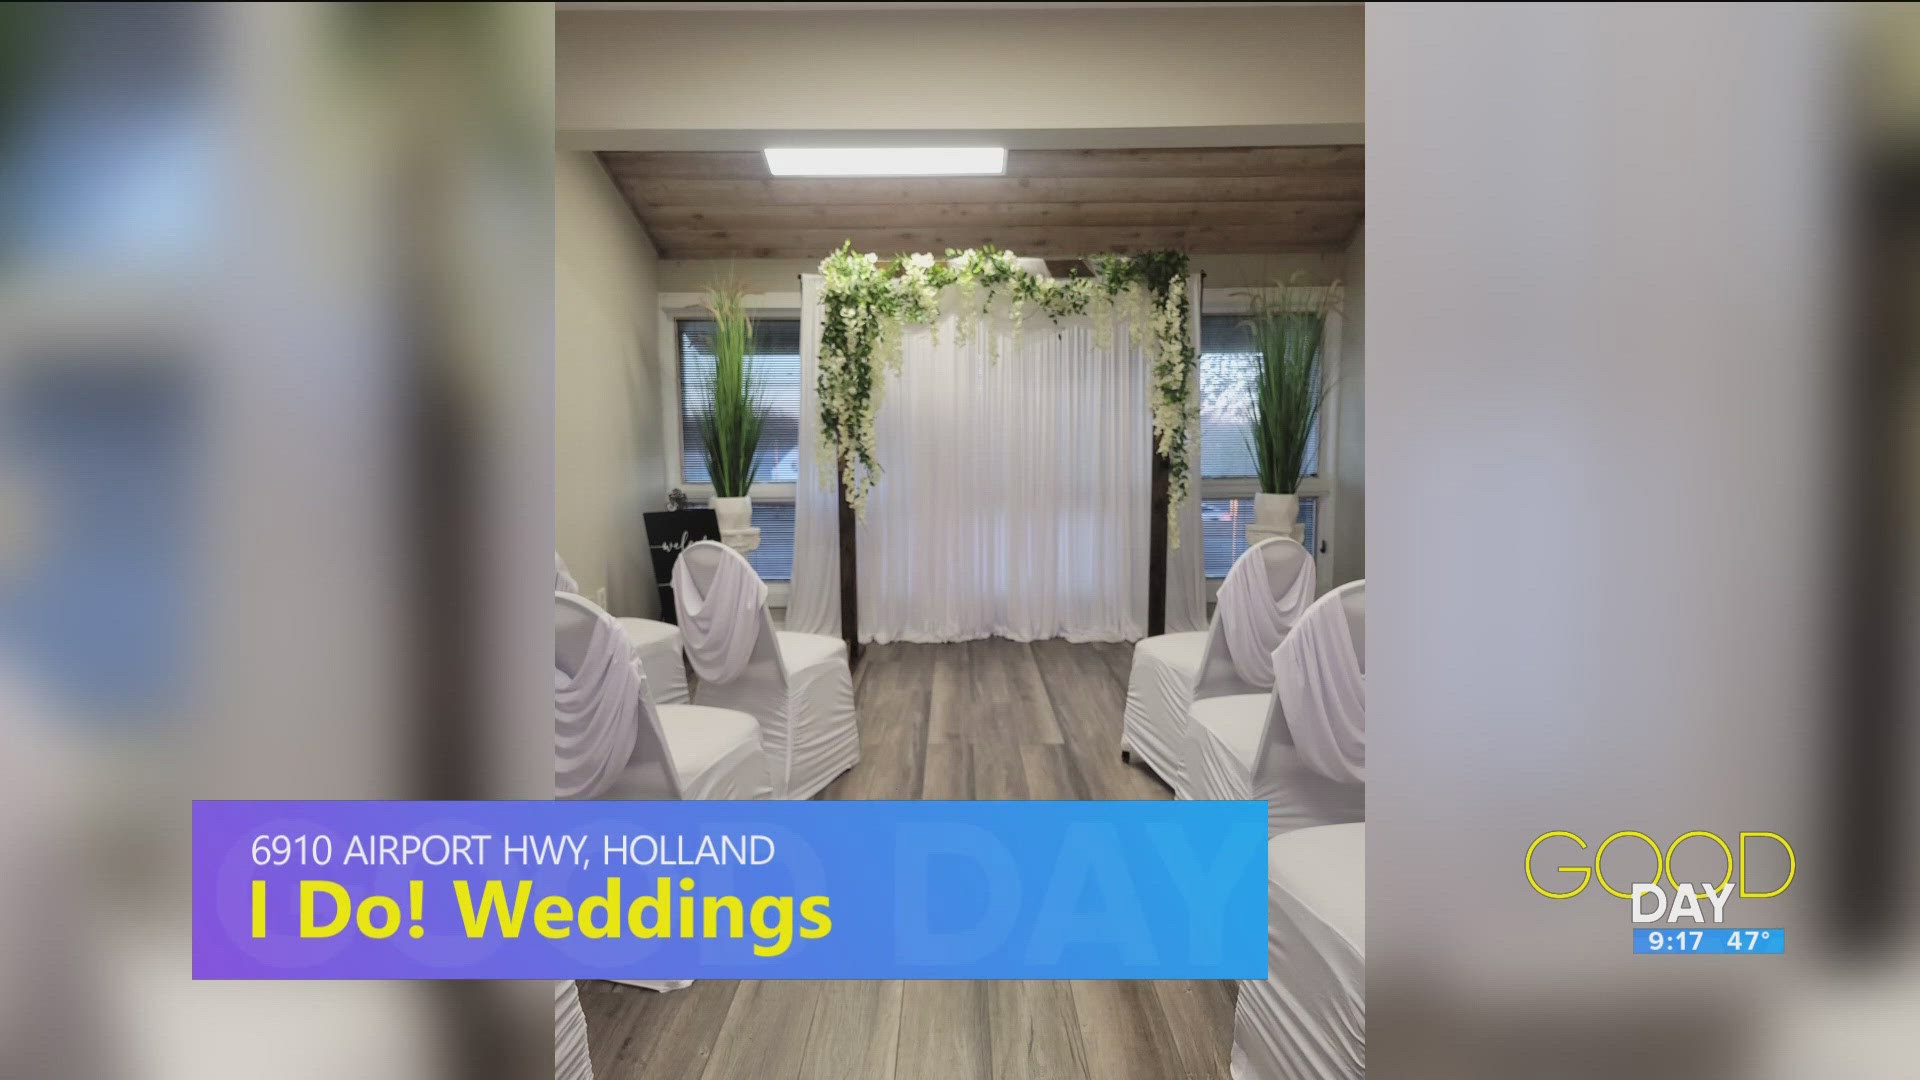 Buffie Beasley and Raquel Copeland are the owners of I DO! Weddings in Holland. Here's how you can tie the knot for only $100.